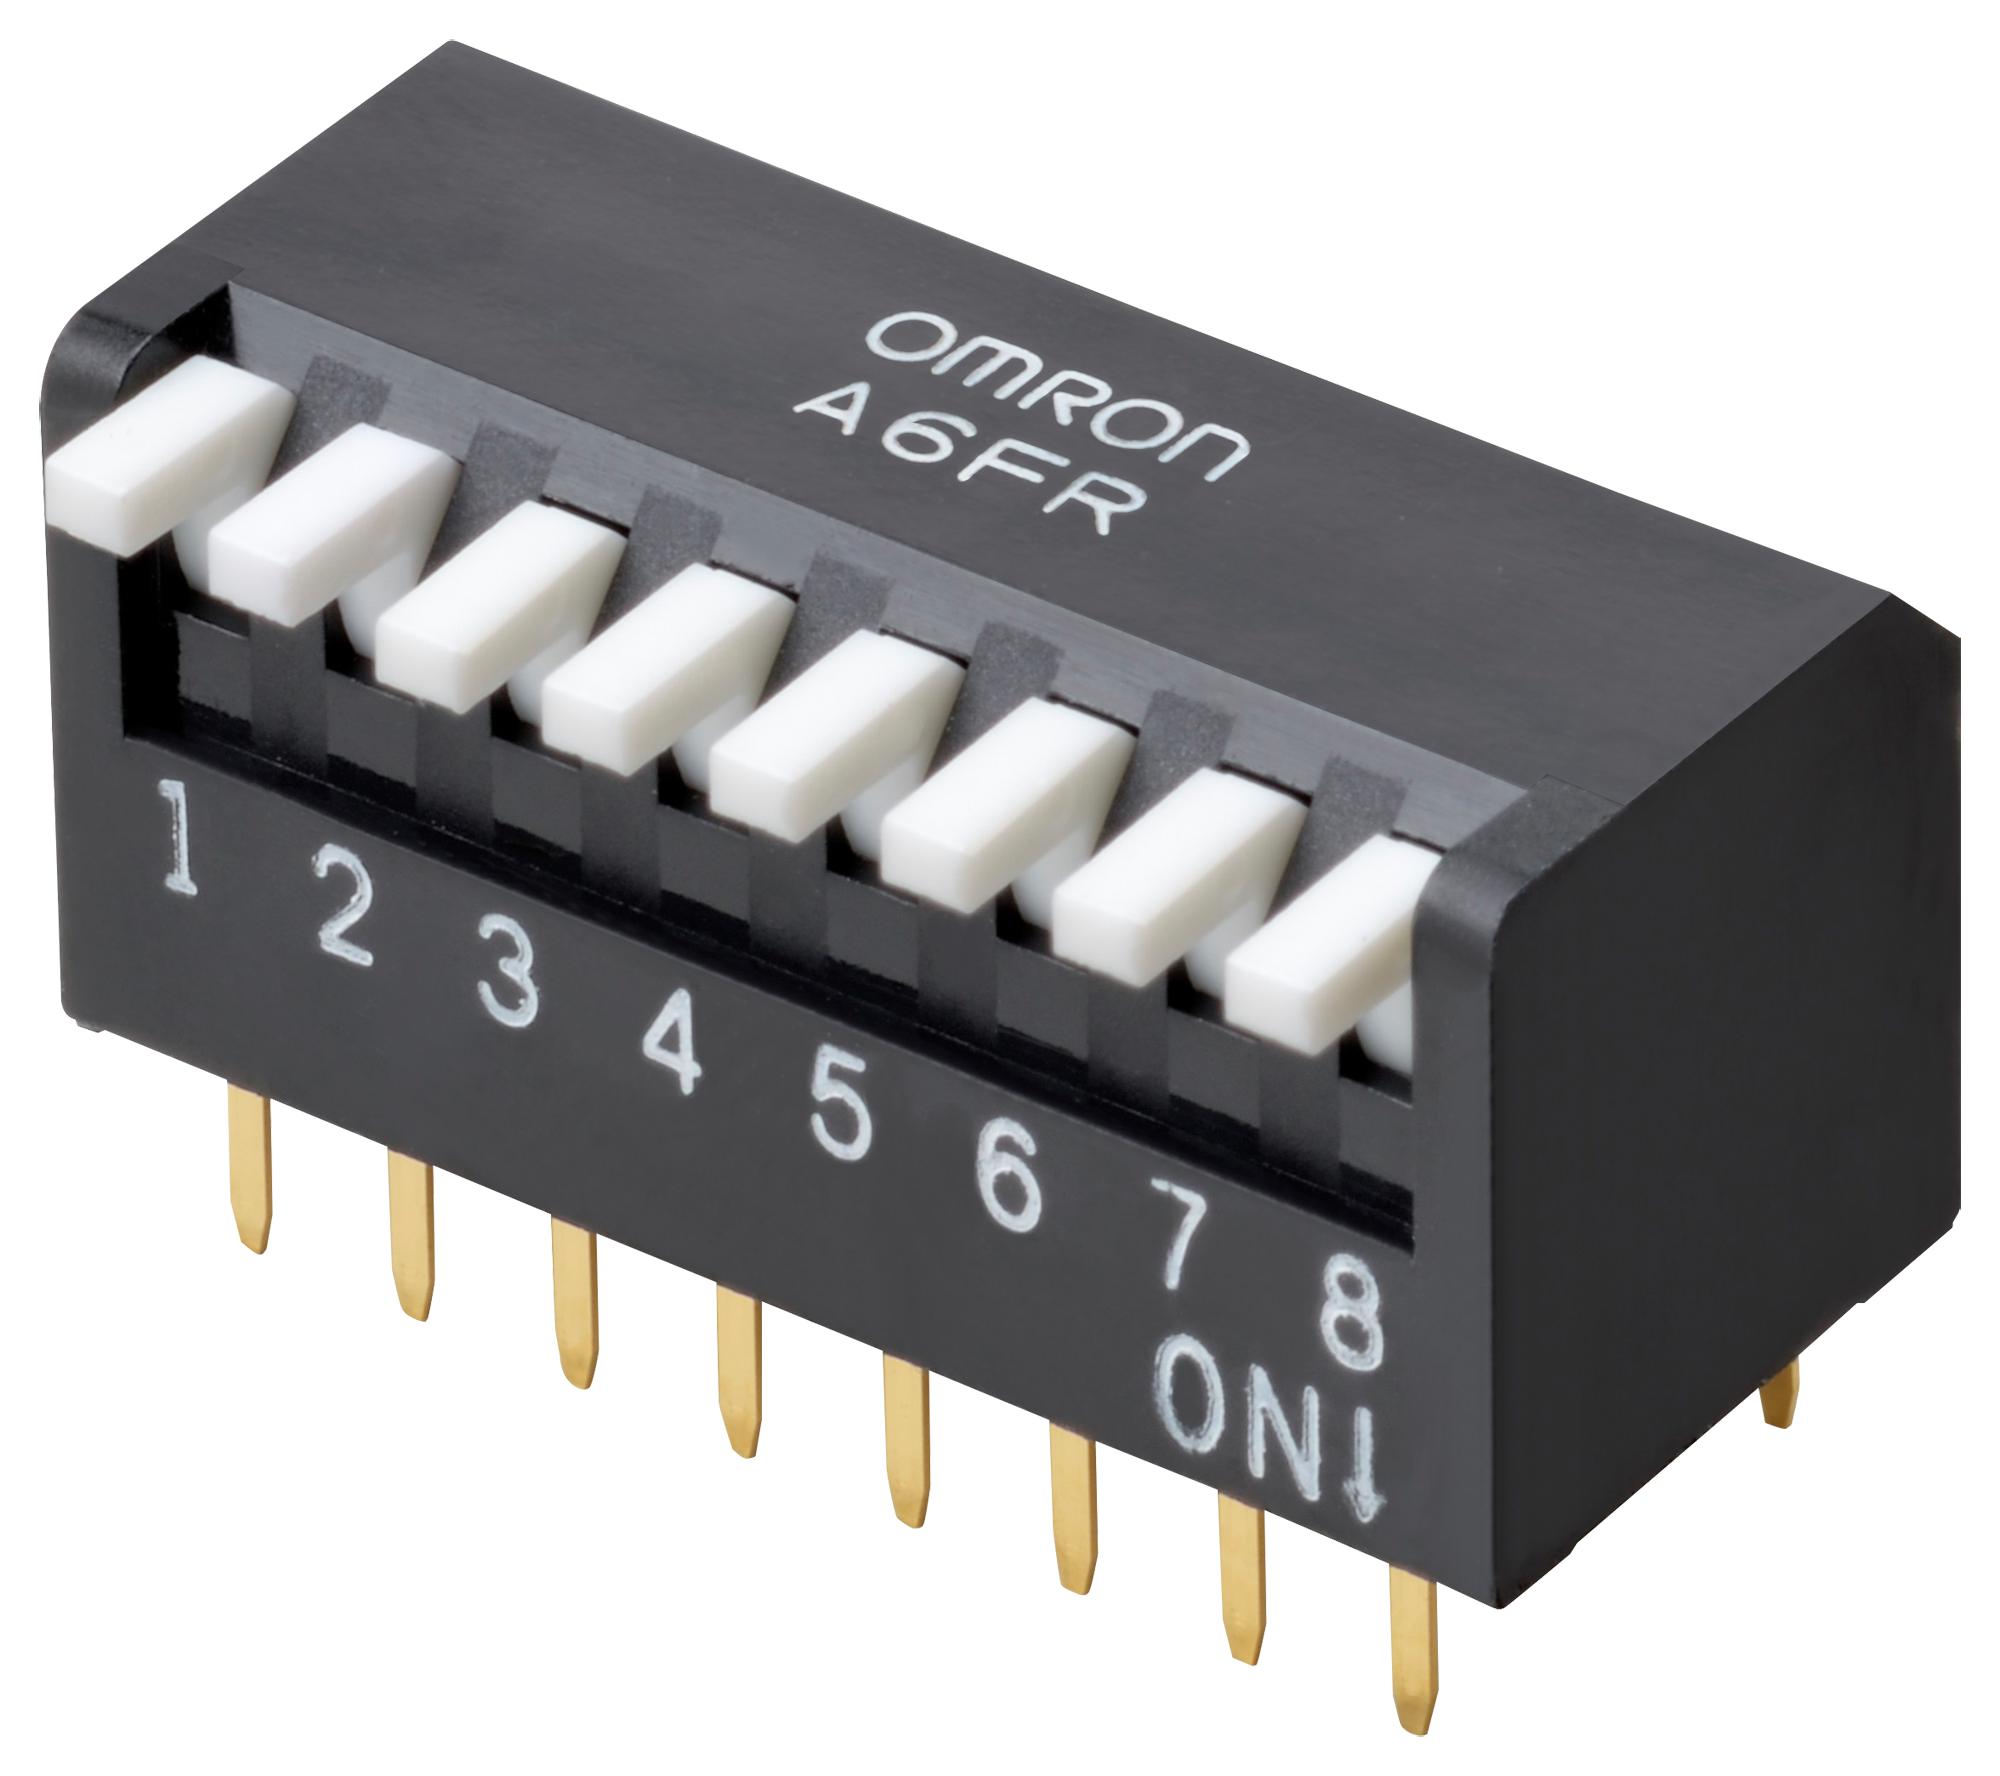 A6FR-0104 DIP SWITCH, 10POS, SPST, PIANO KEY, TH OMRON